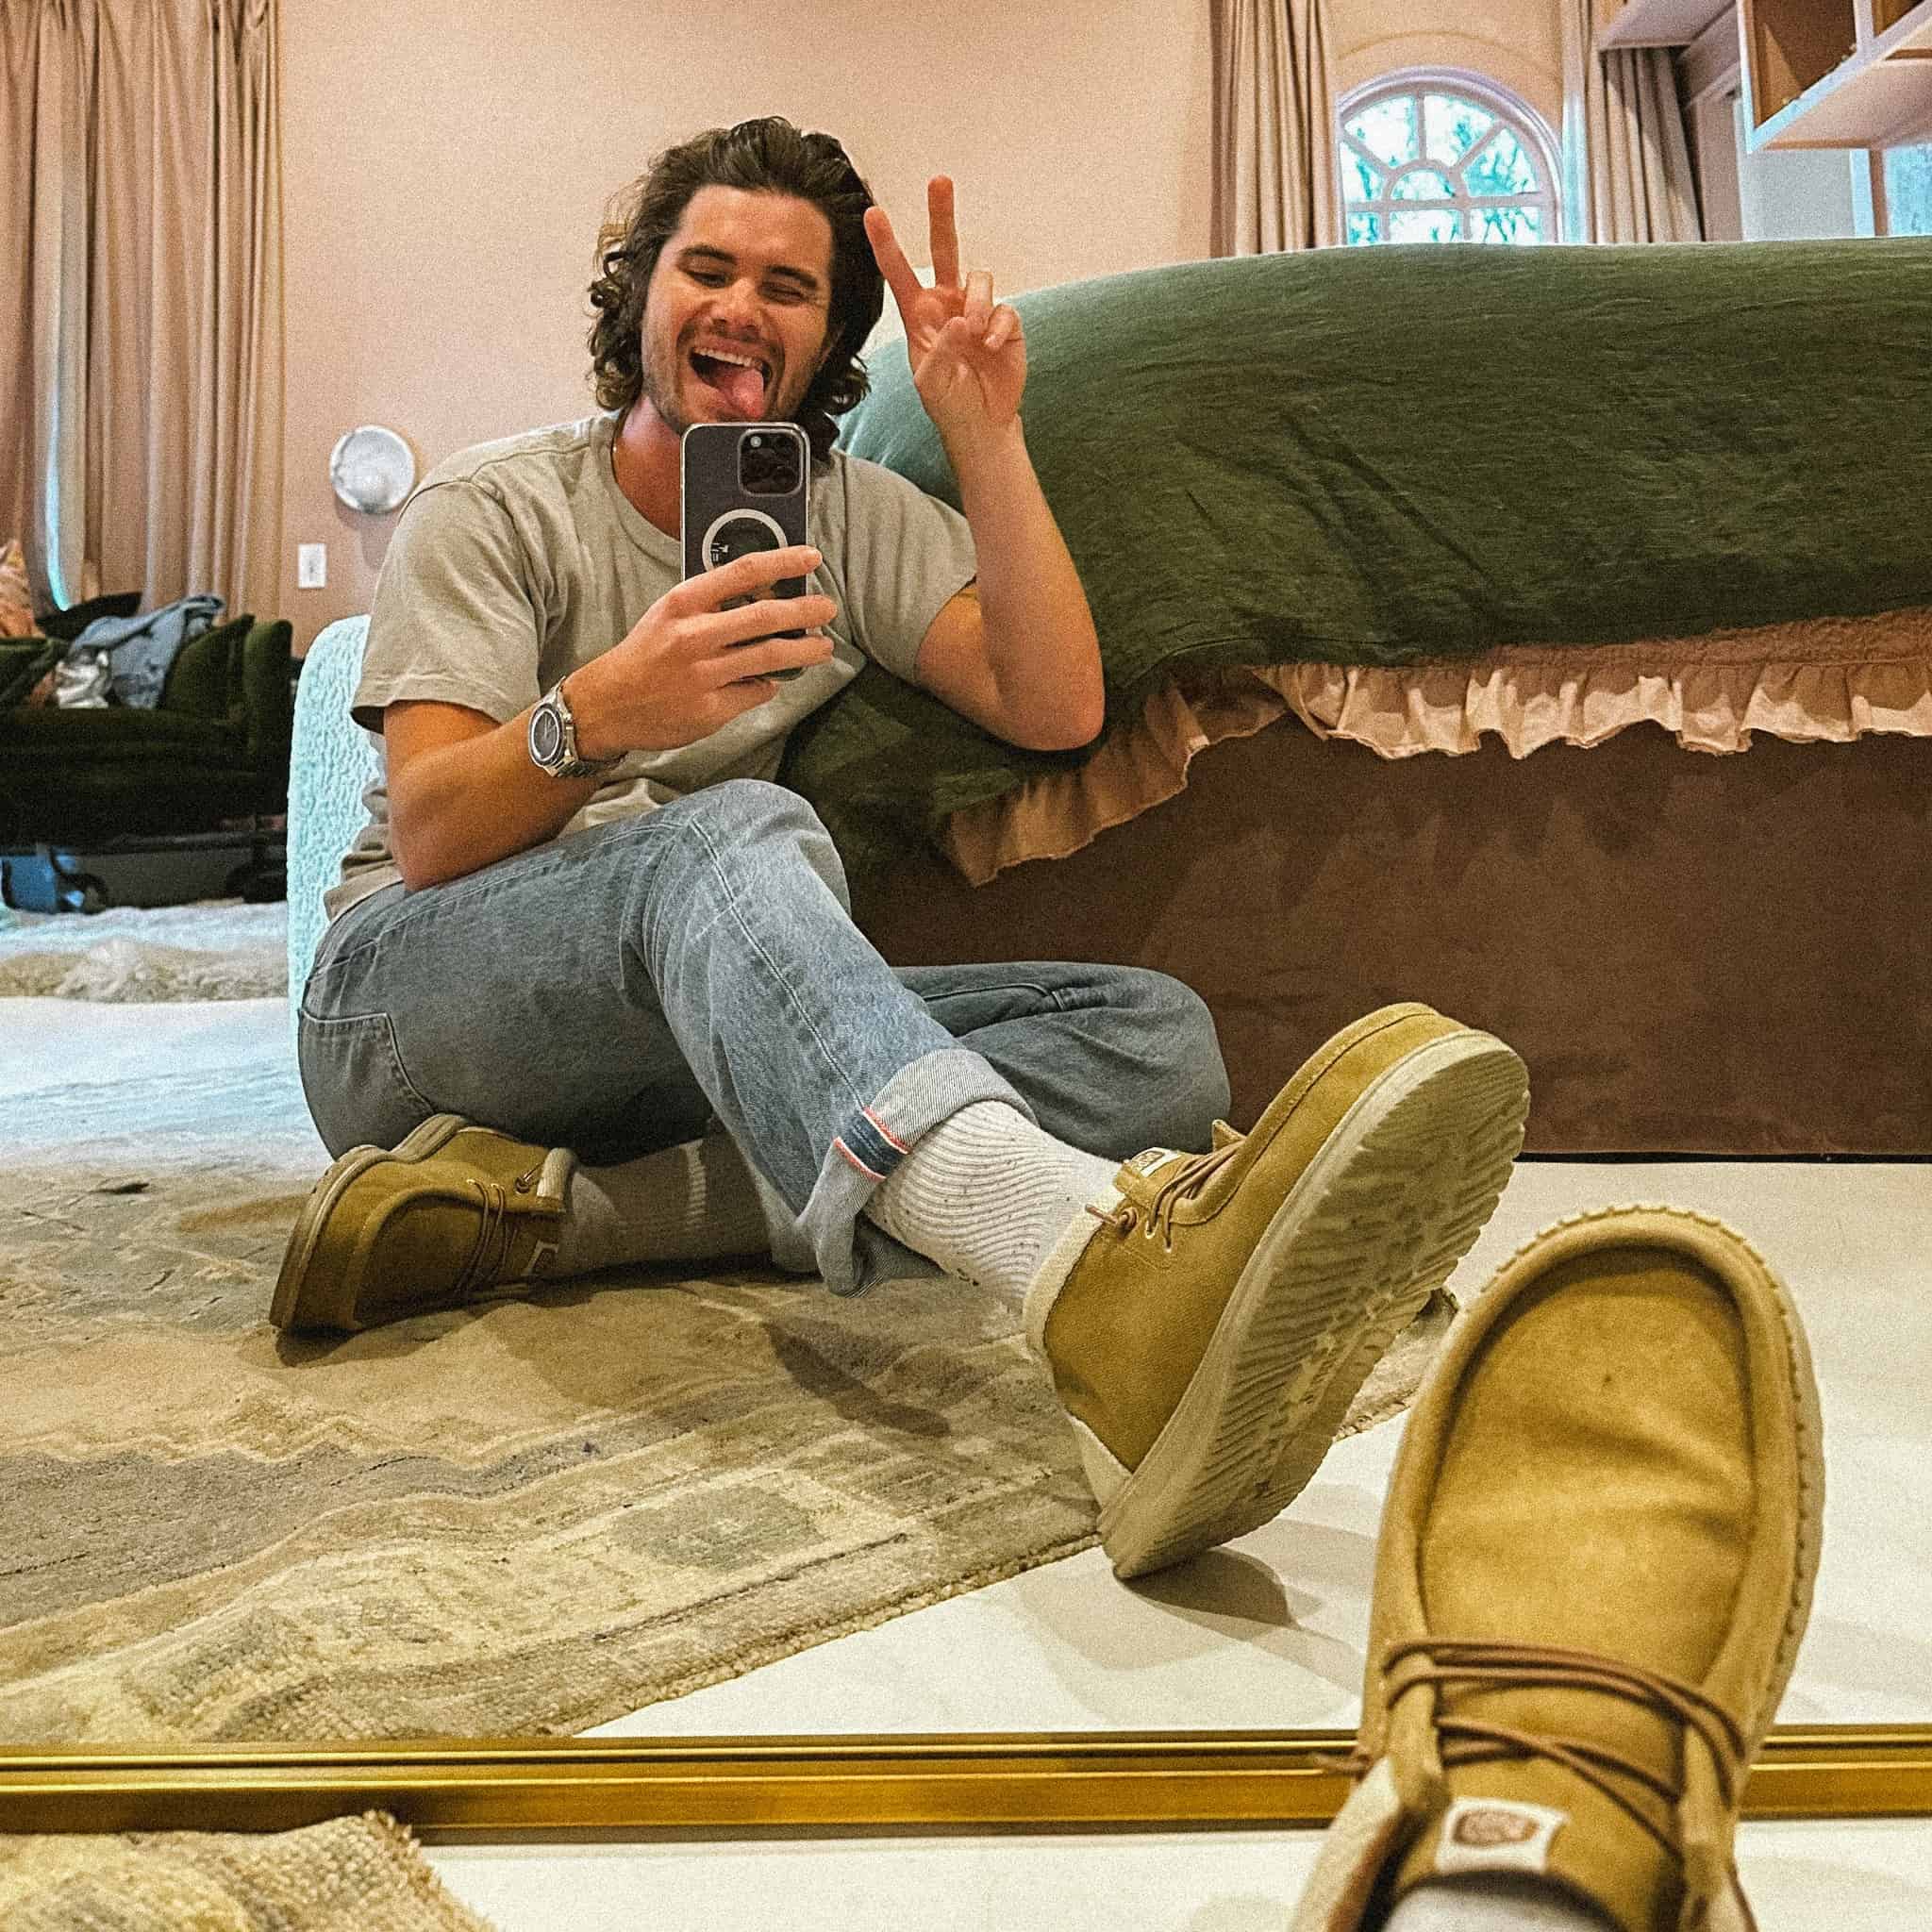 man taking a mirror selfie and throwing a peace sign